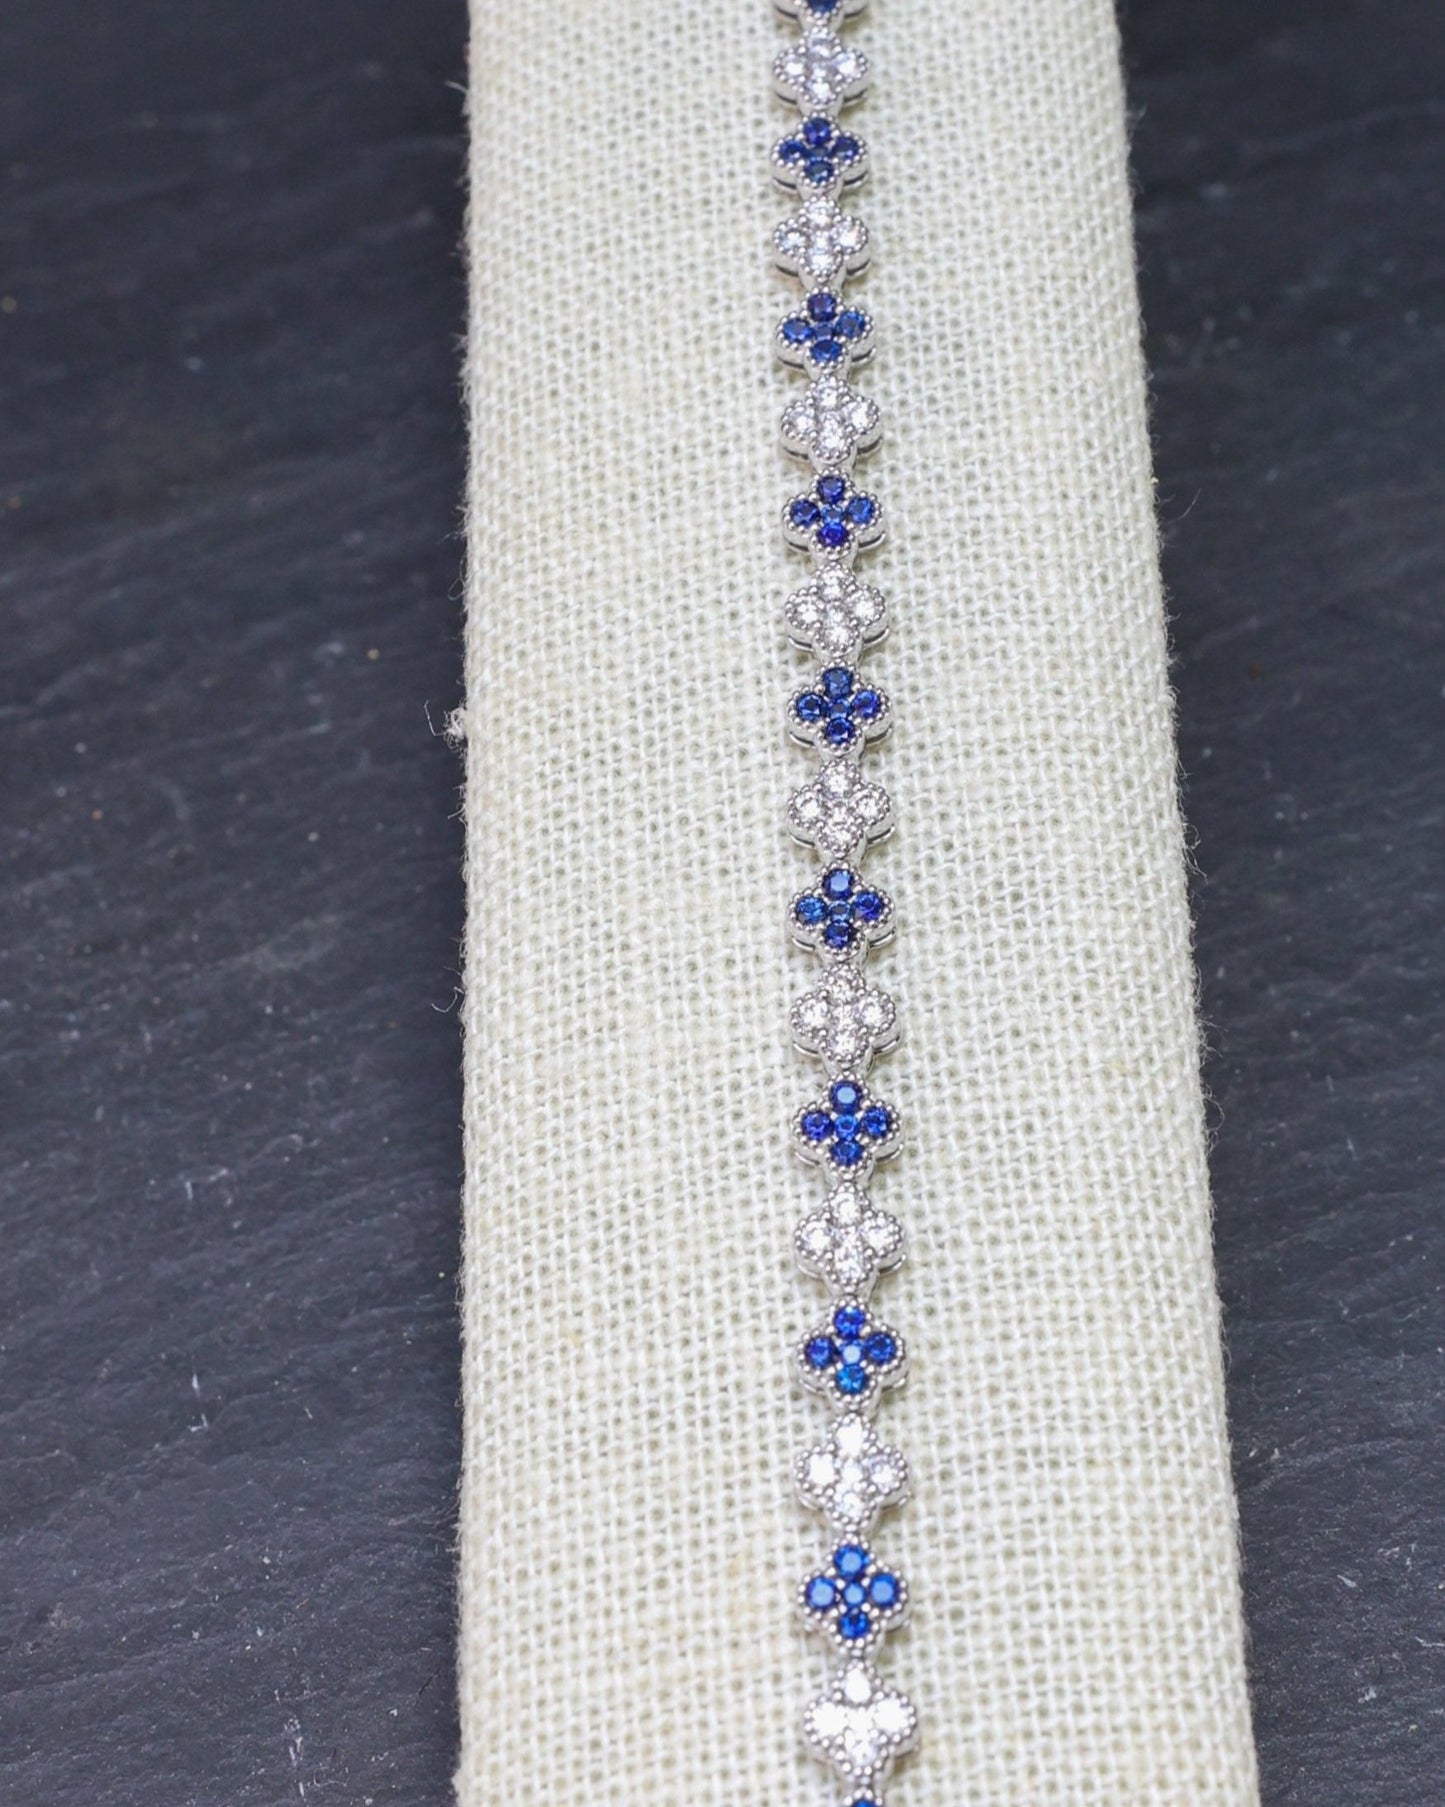 18K White Gold Tennis bracelet with Diamonds and Sapphires made by Jewel in the Sea on Nantucket